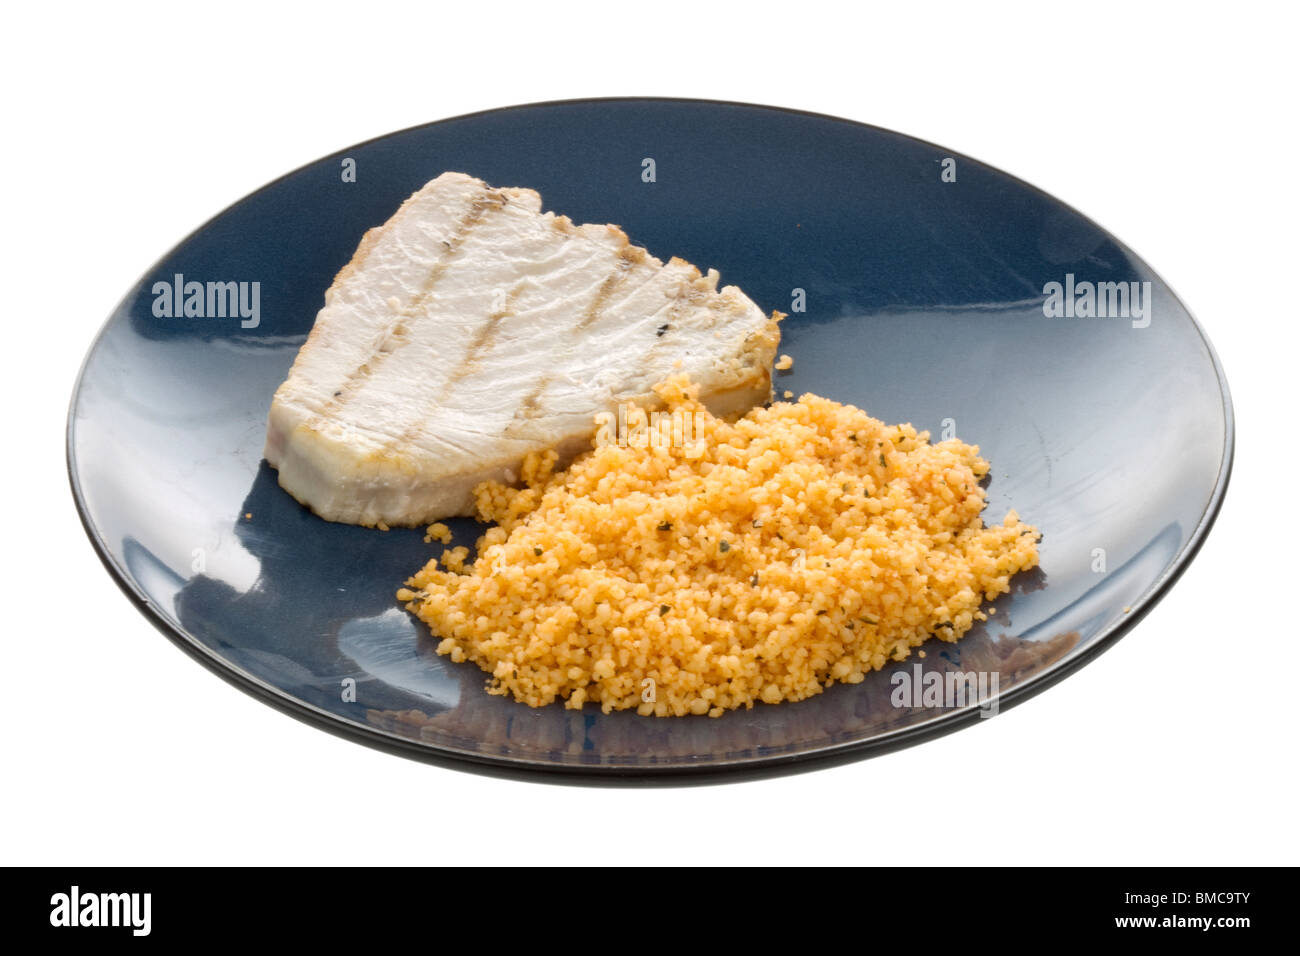 Tuna Steak with Cous Cous Stock Photo